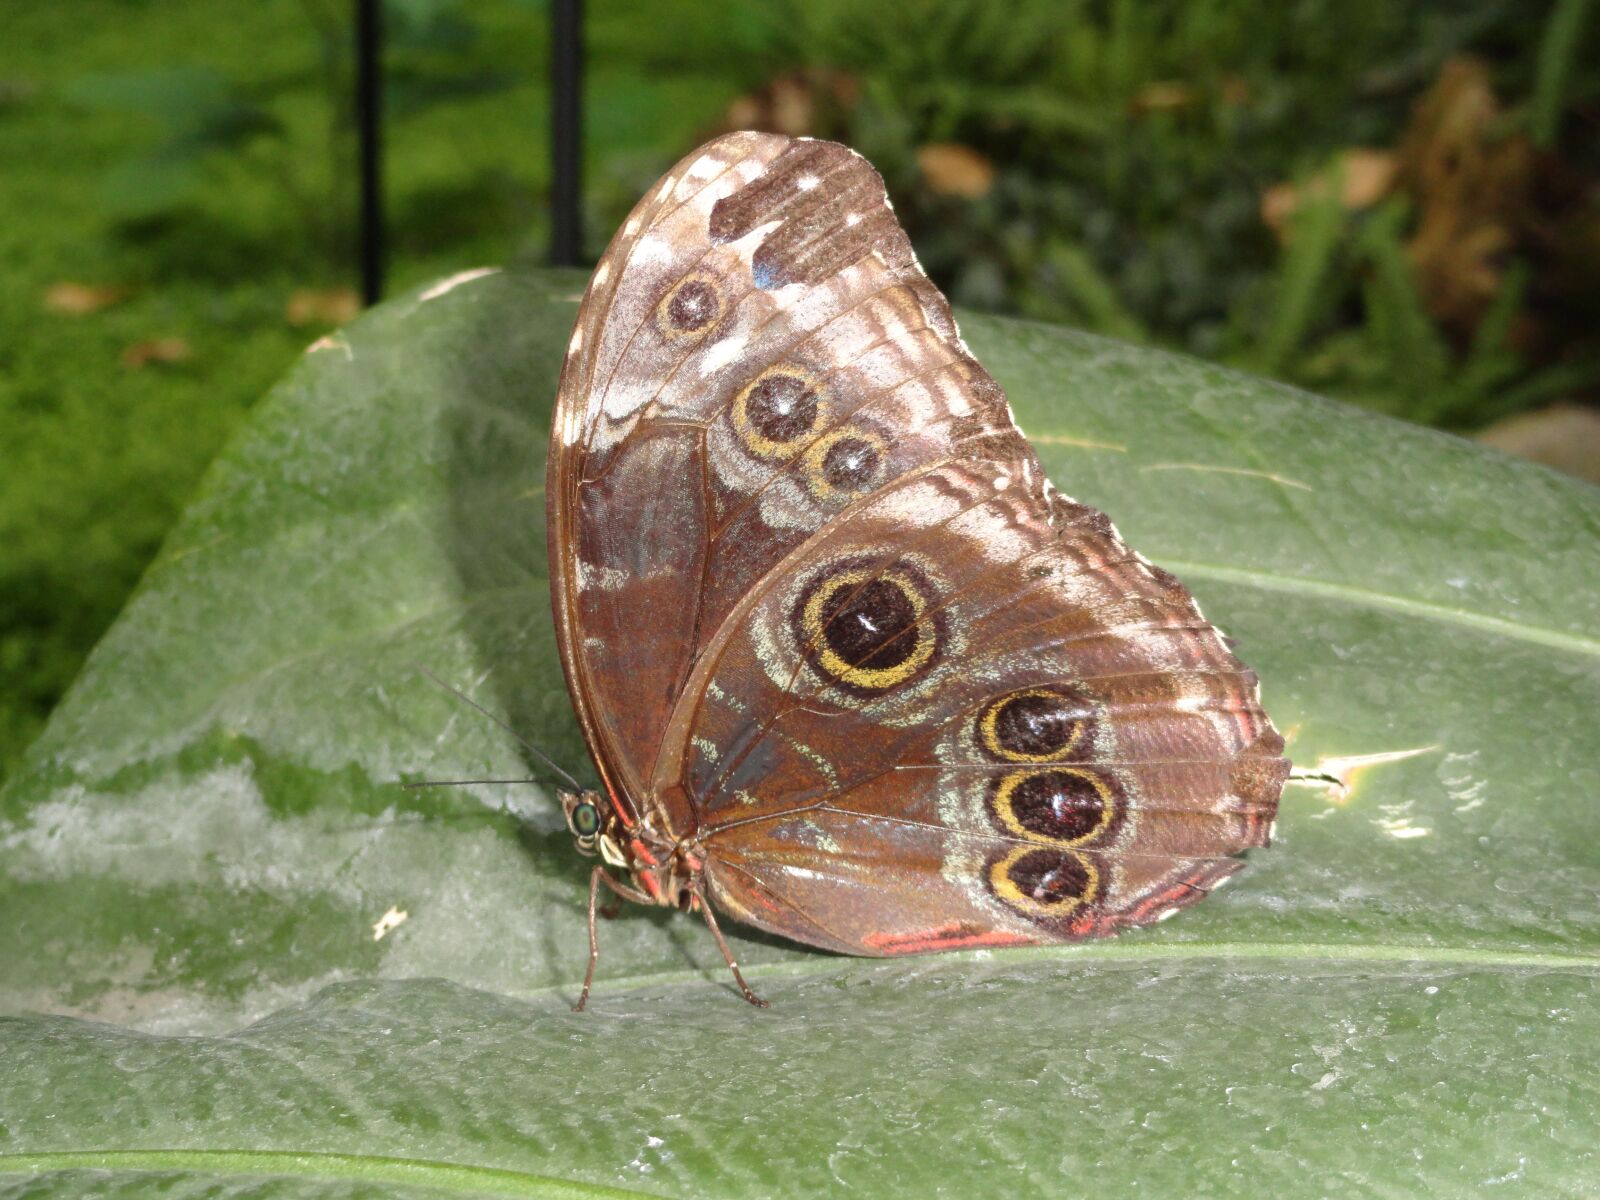 Sony Cyber-shot DSC-H70 sample photo. Butterfly, brown, nature photography